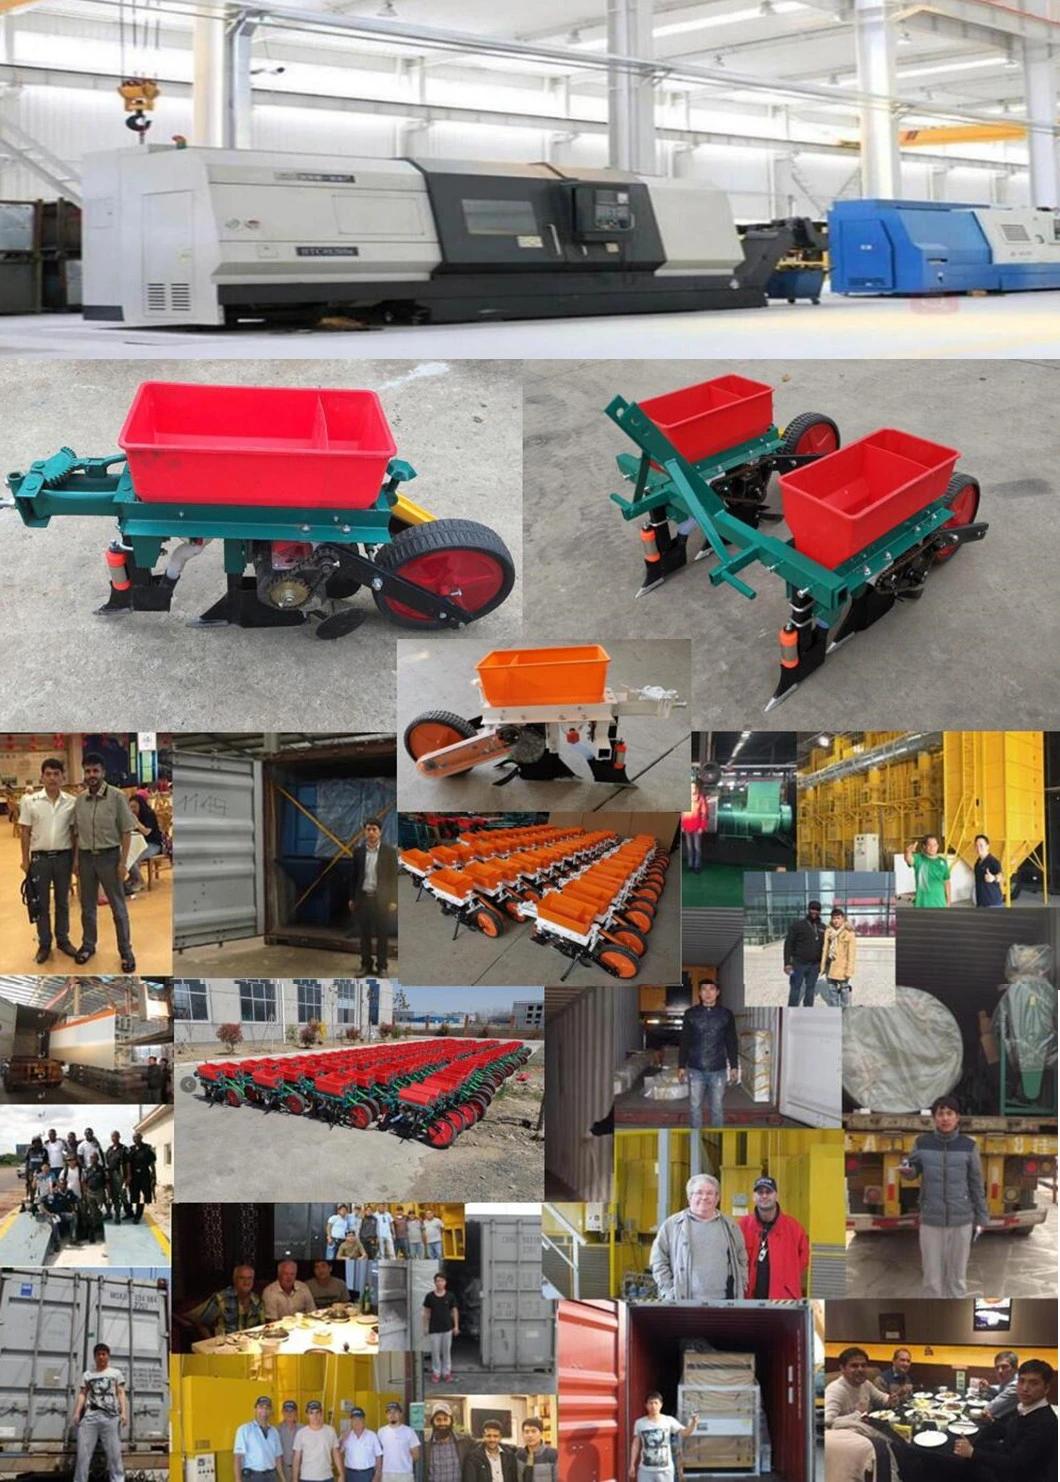 Small Maize Corn Seeder for Farm Hot Sale at Africa